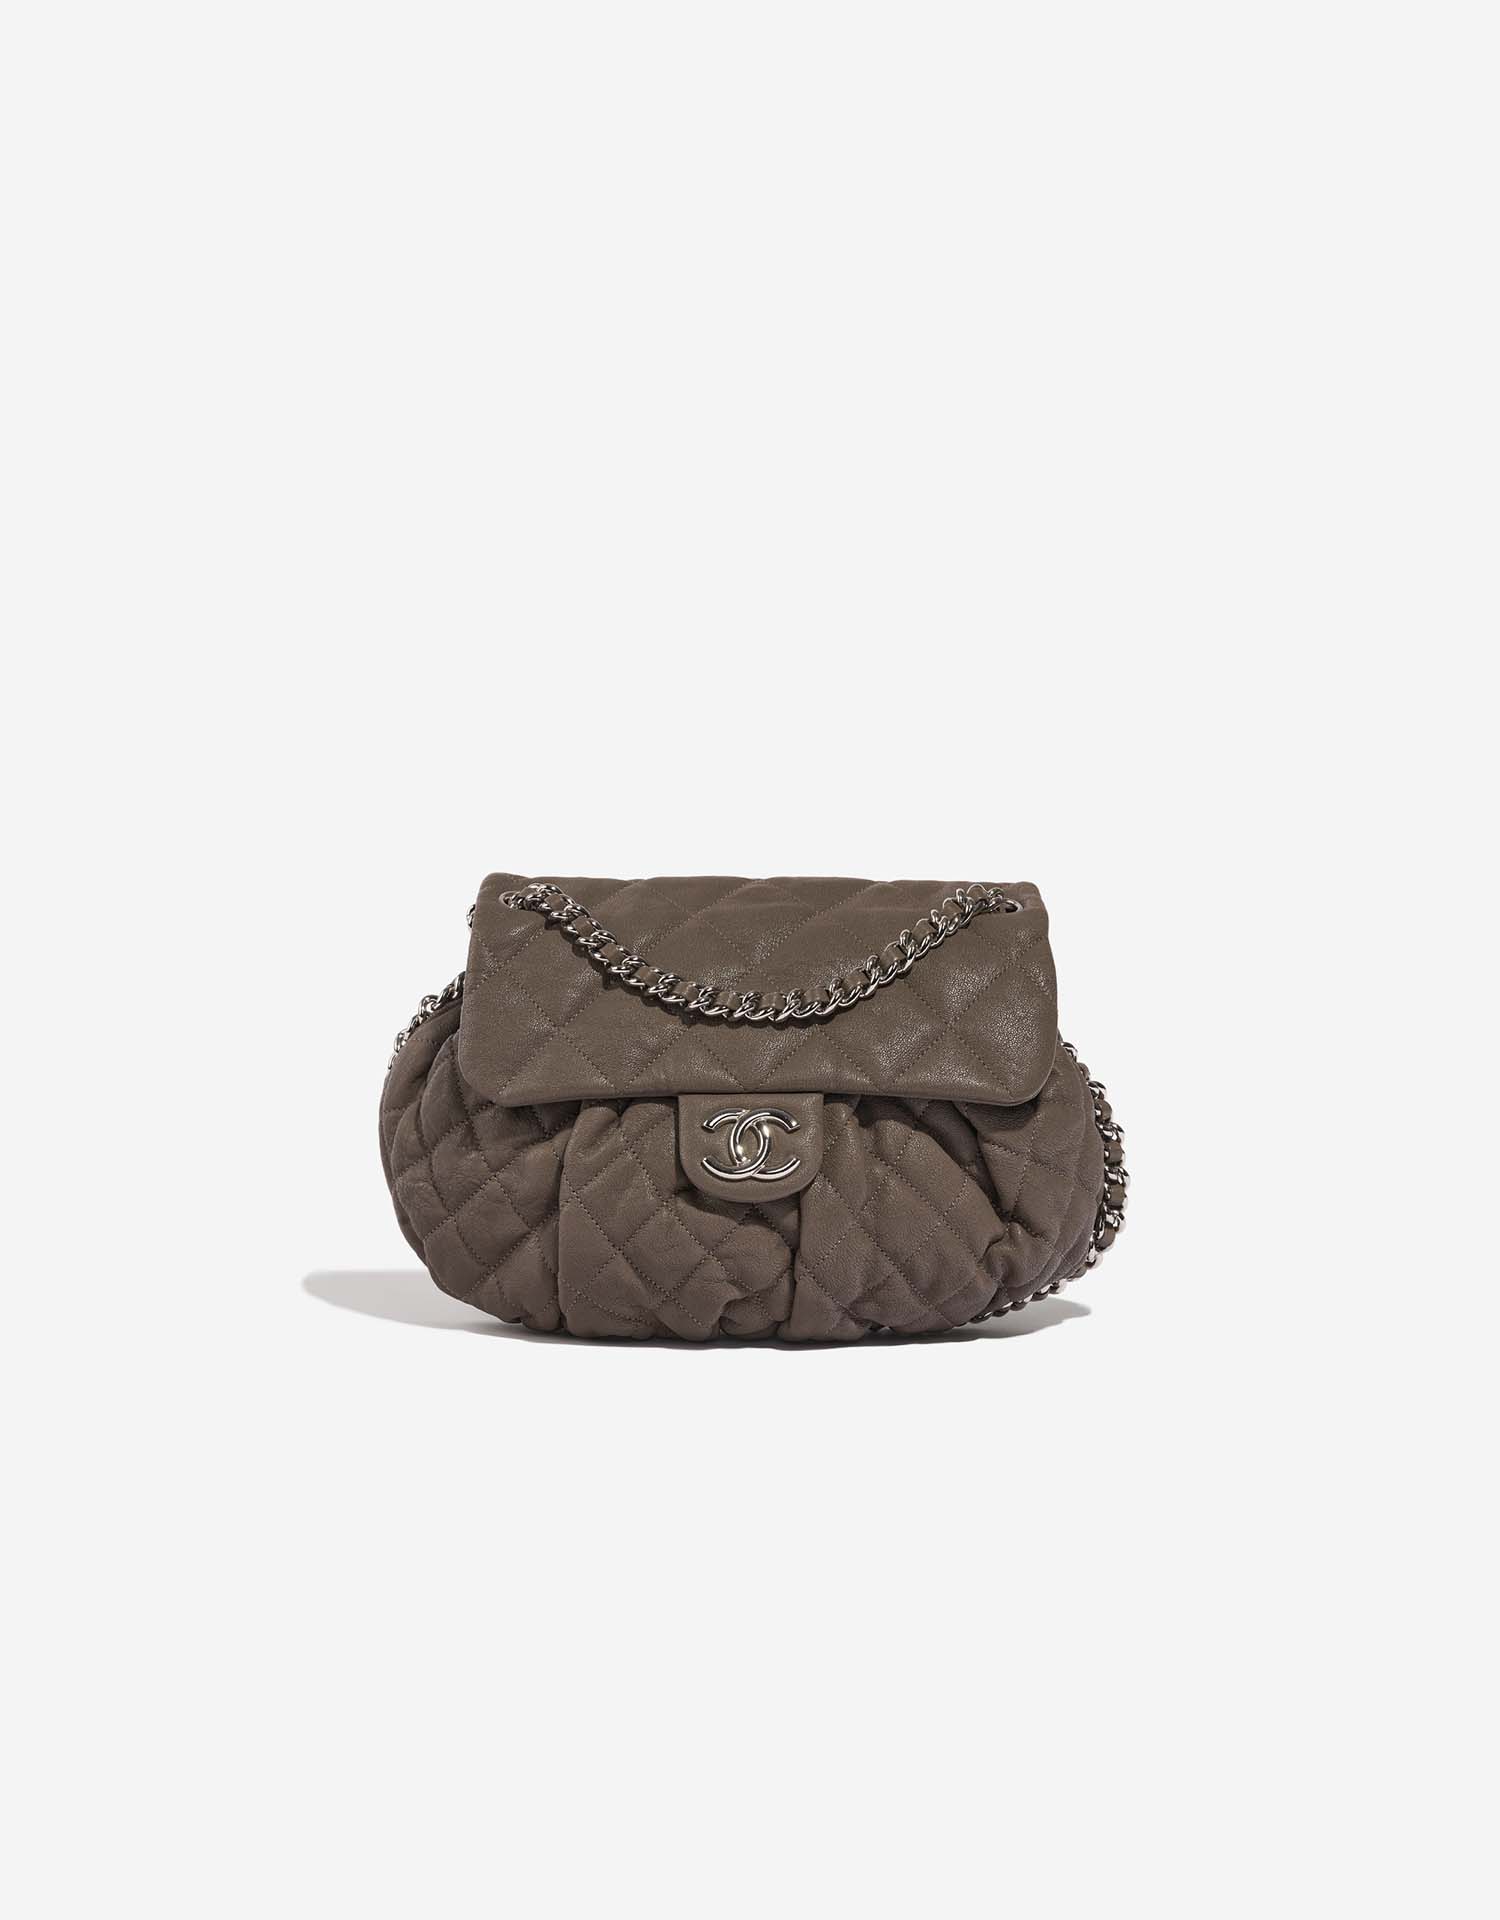 Chanel Taupe Gray-Beige Chain Around Crossbody Flap Bag SHW